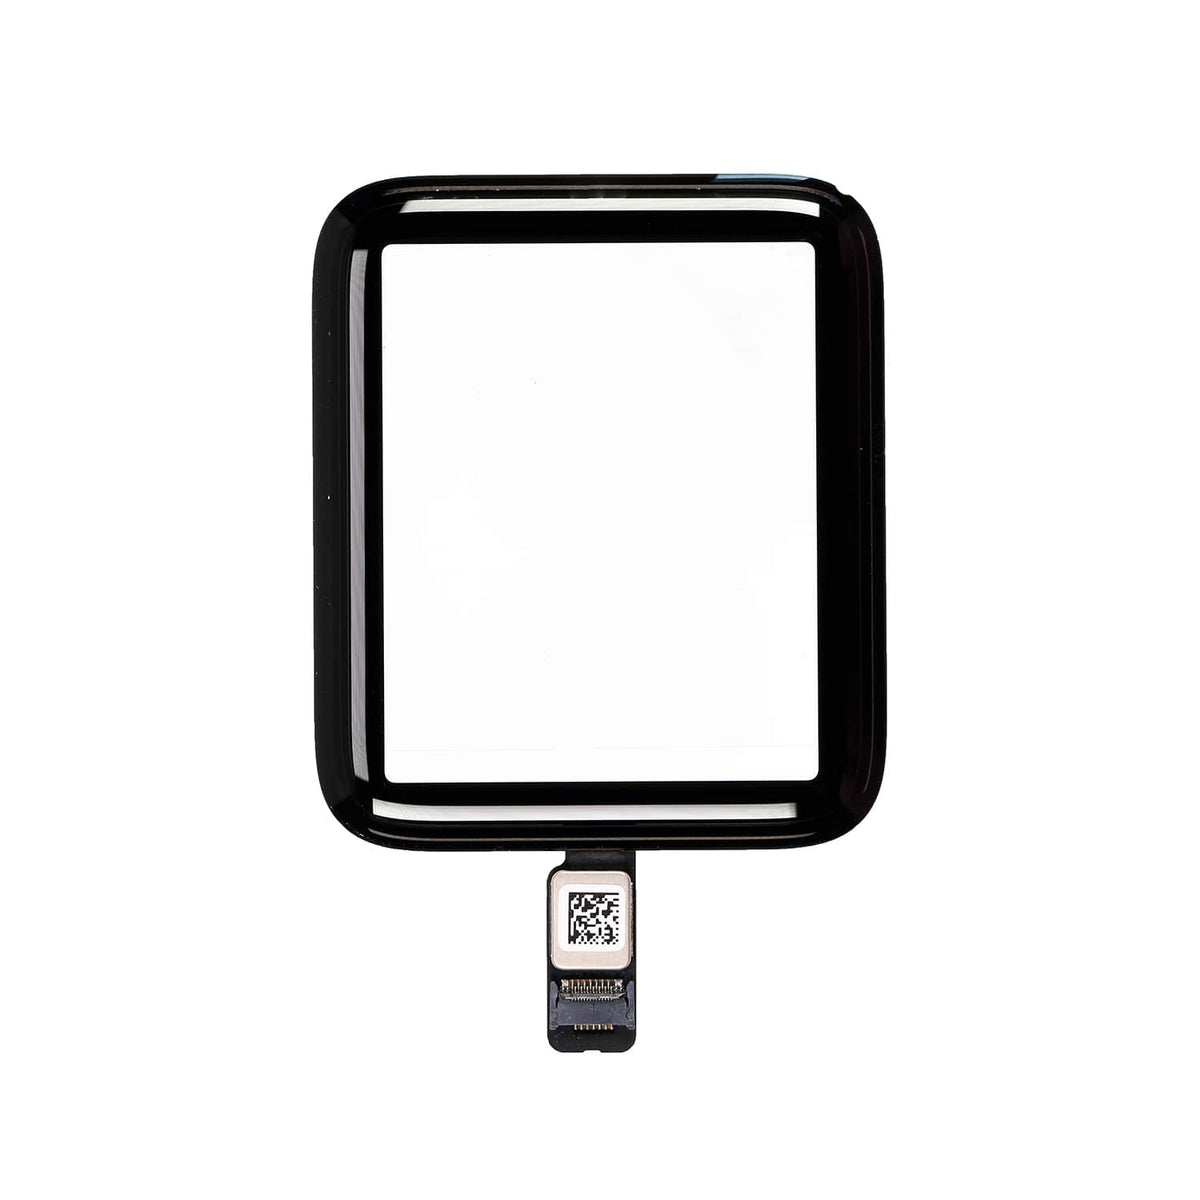 FRONT GLASS LENS FOR APPLE WATCH S2 42MM